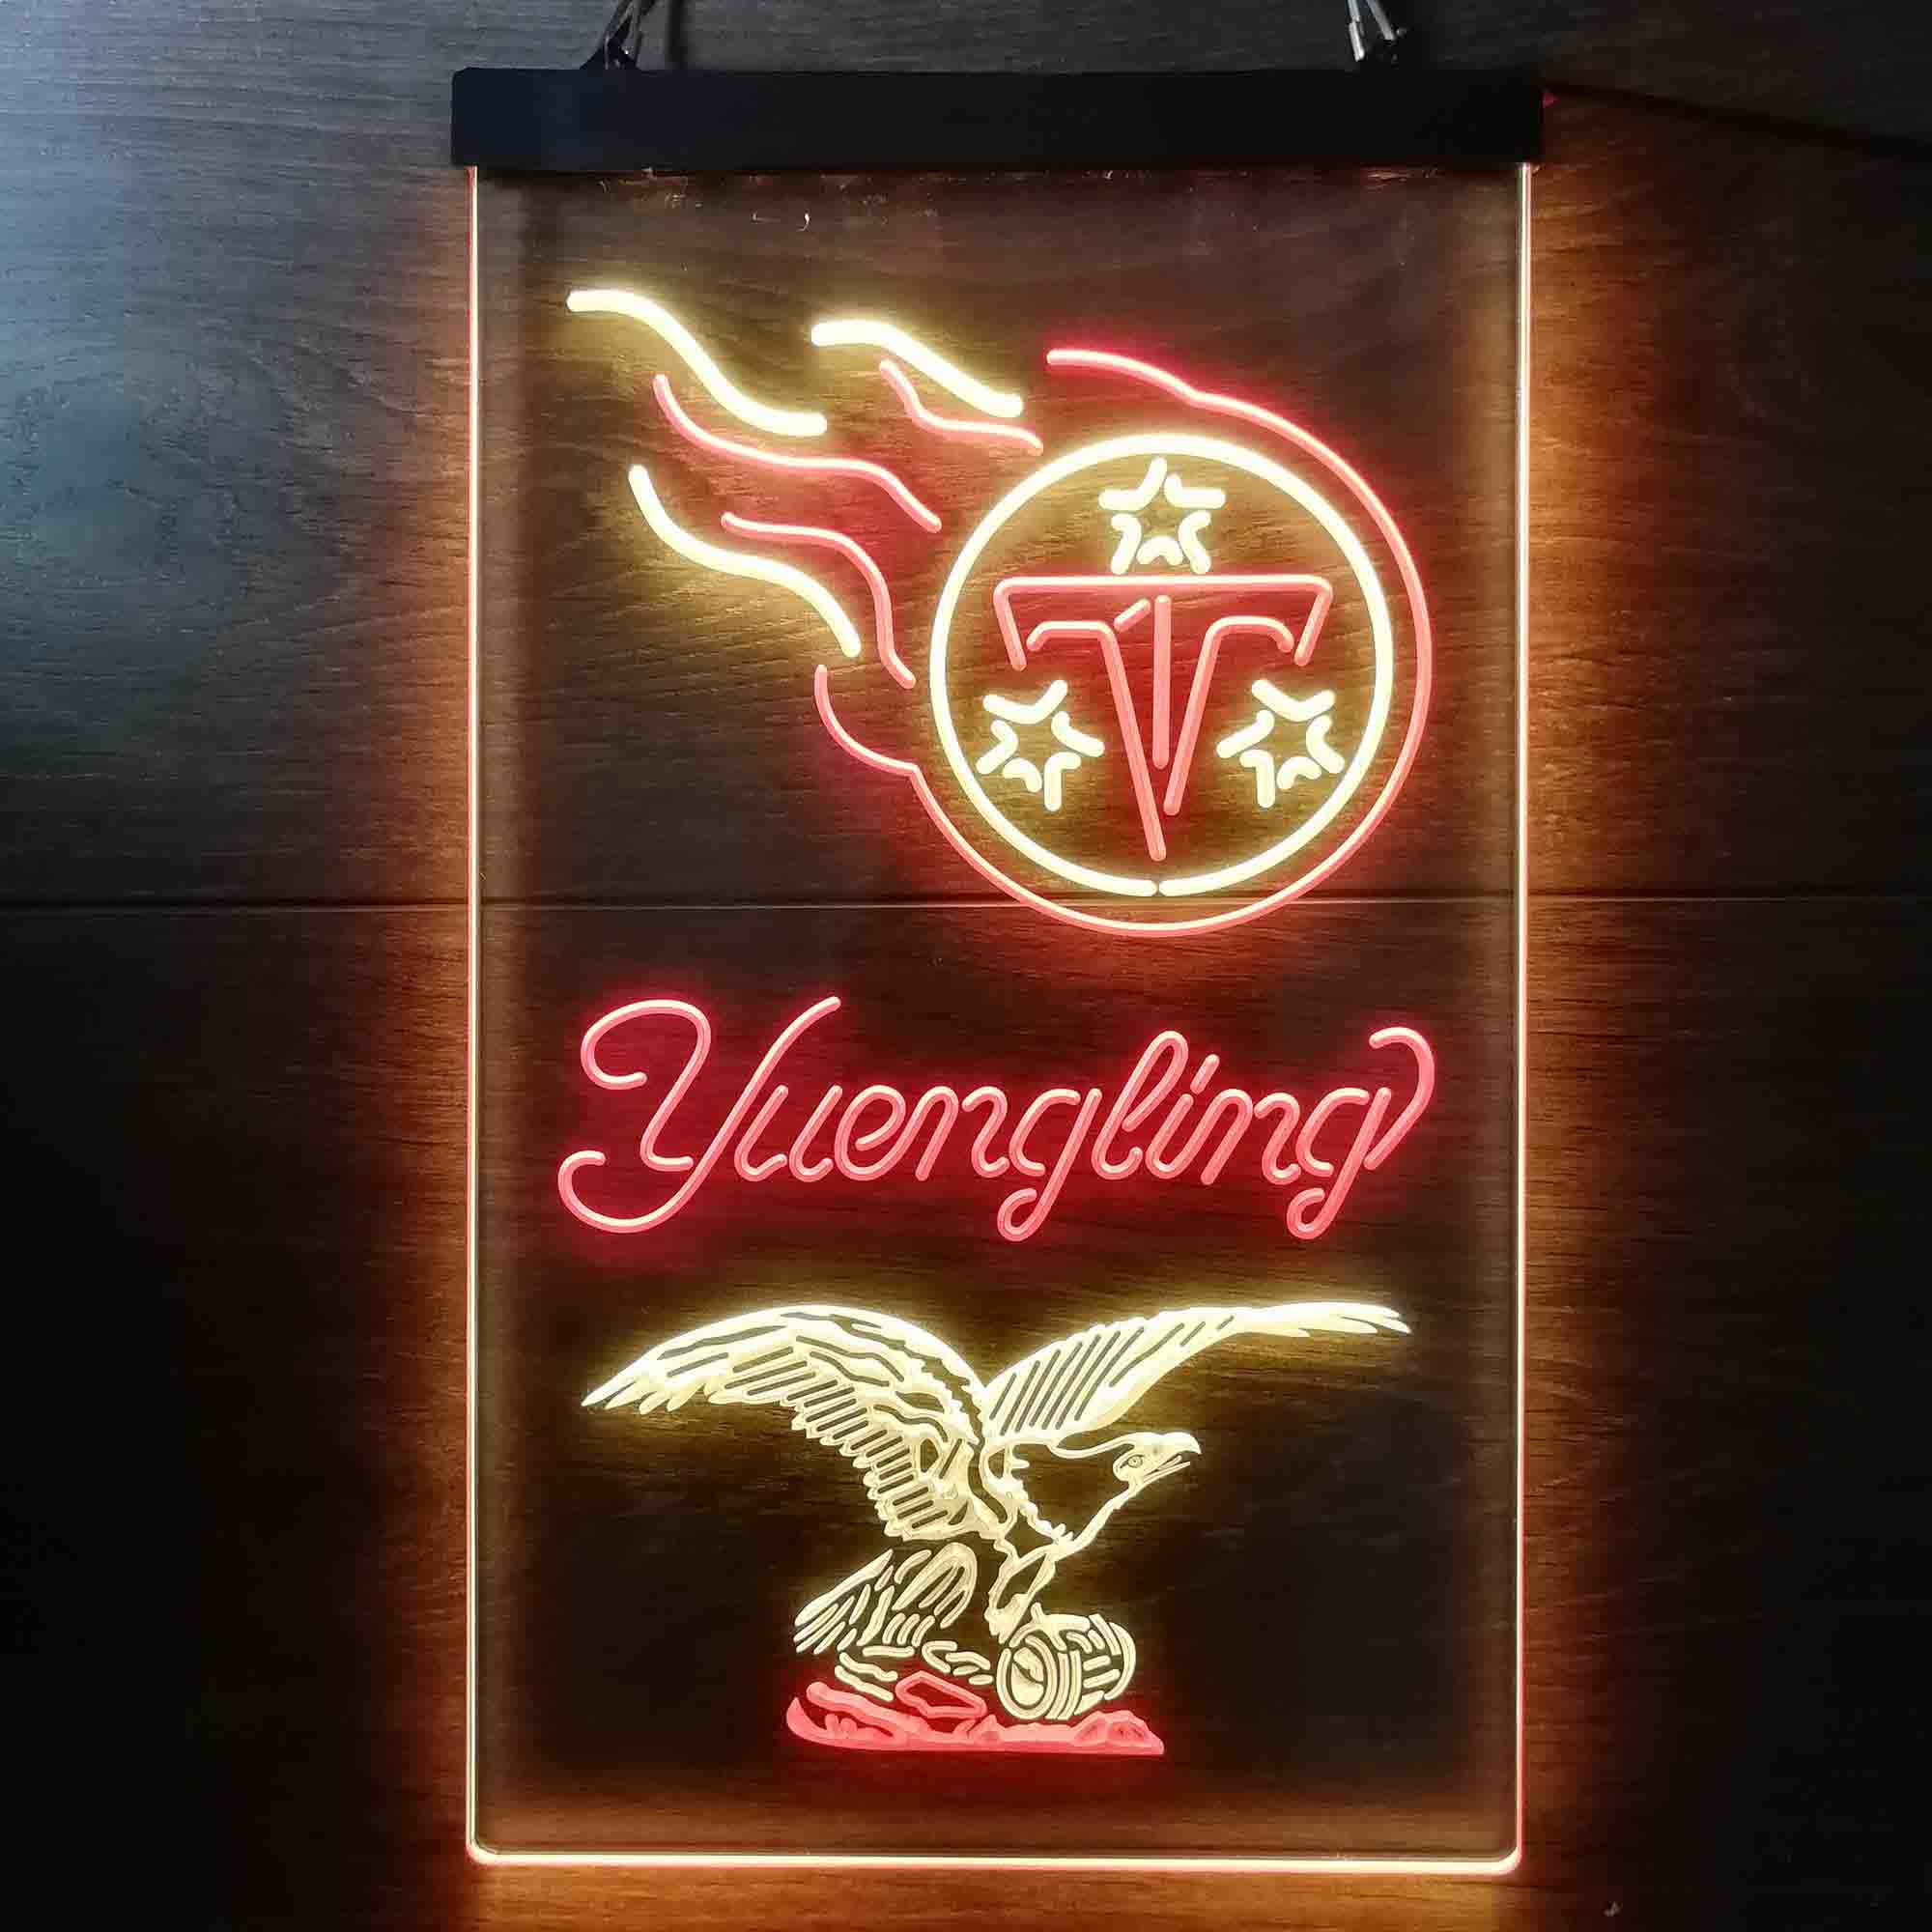 Yuengling Bar Tennessee Titans Est. 1960 Neon-Like LED Sign